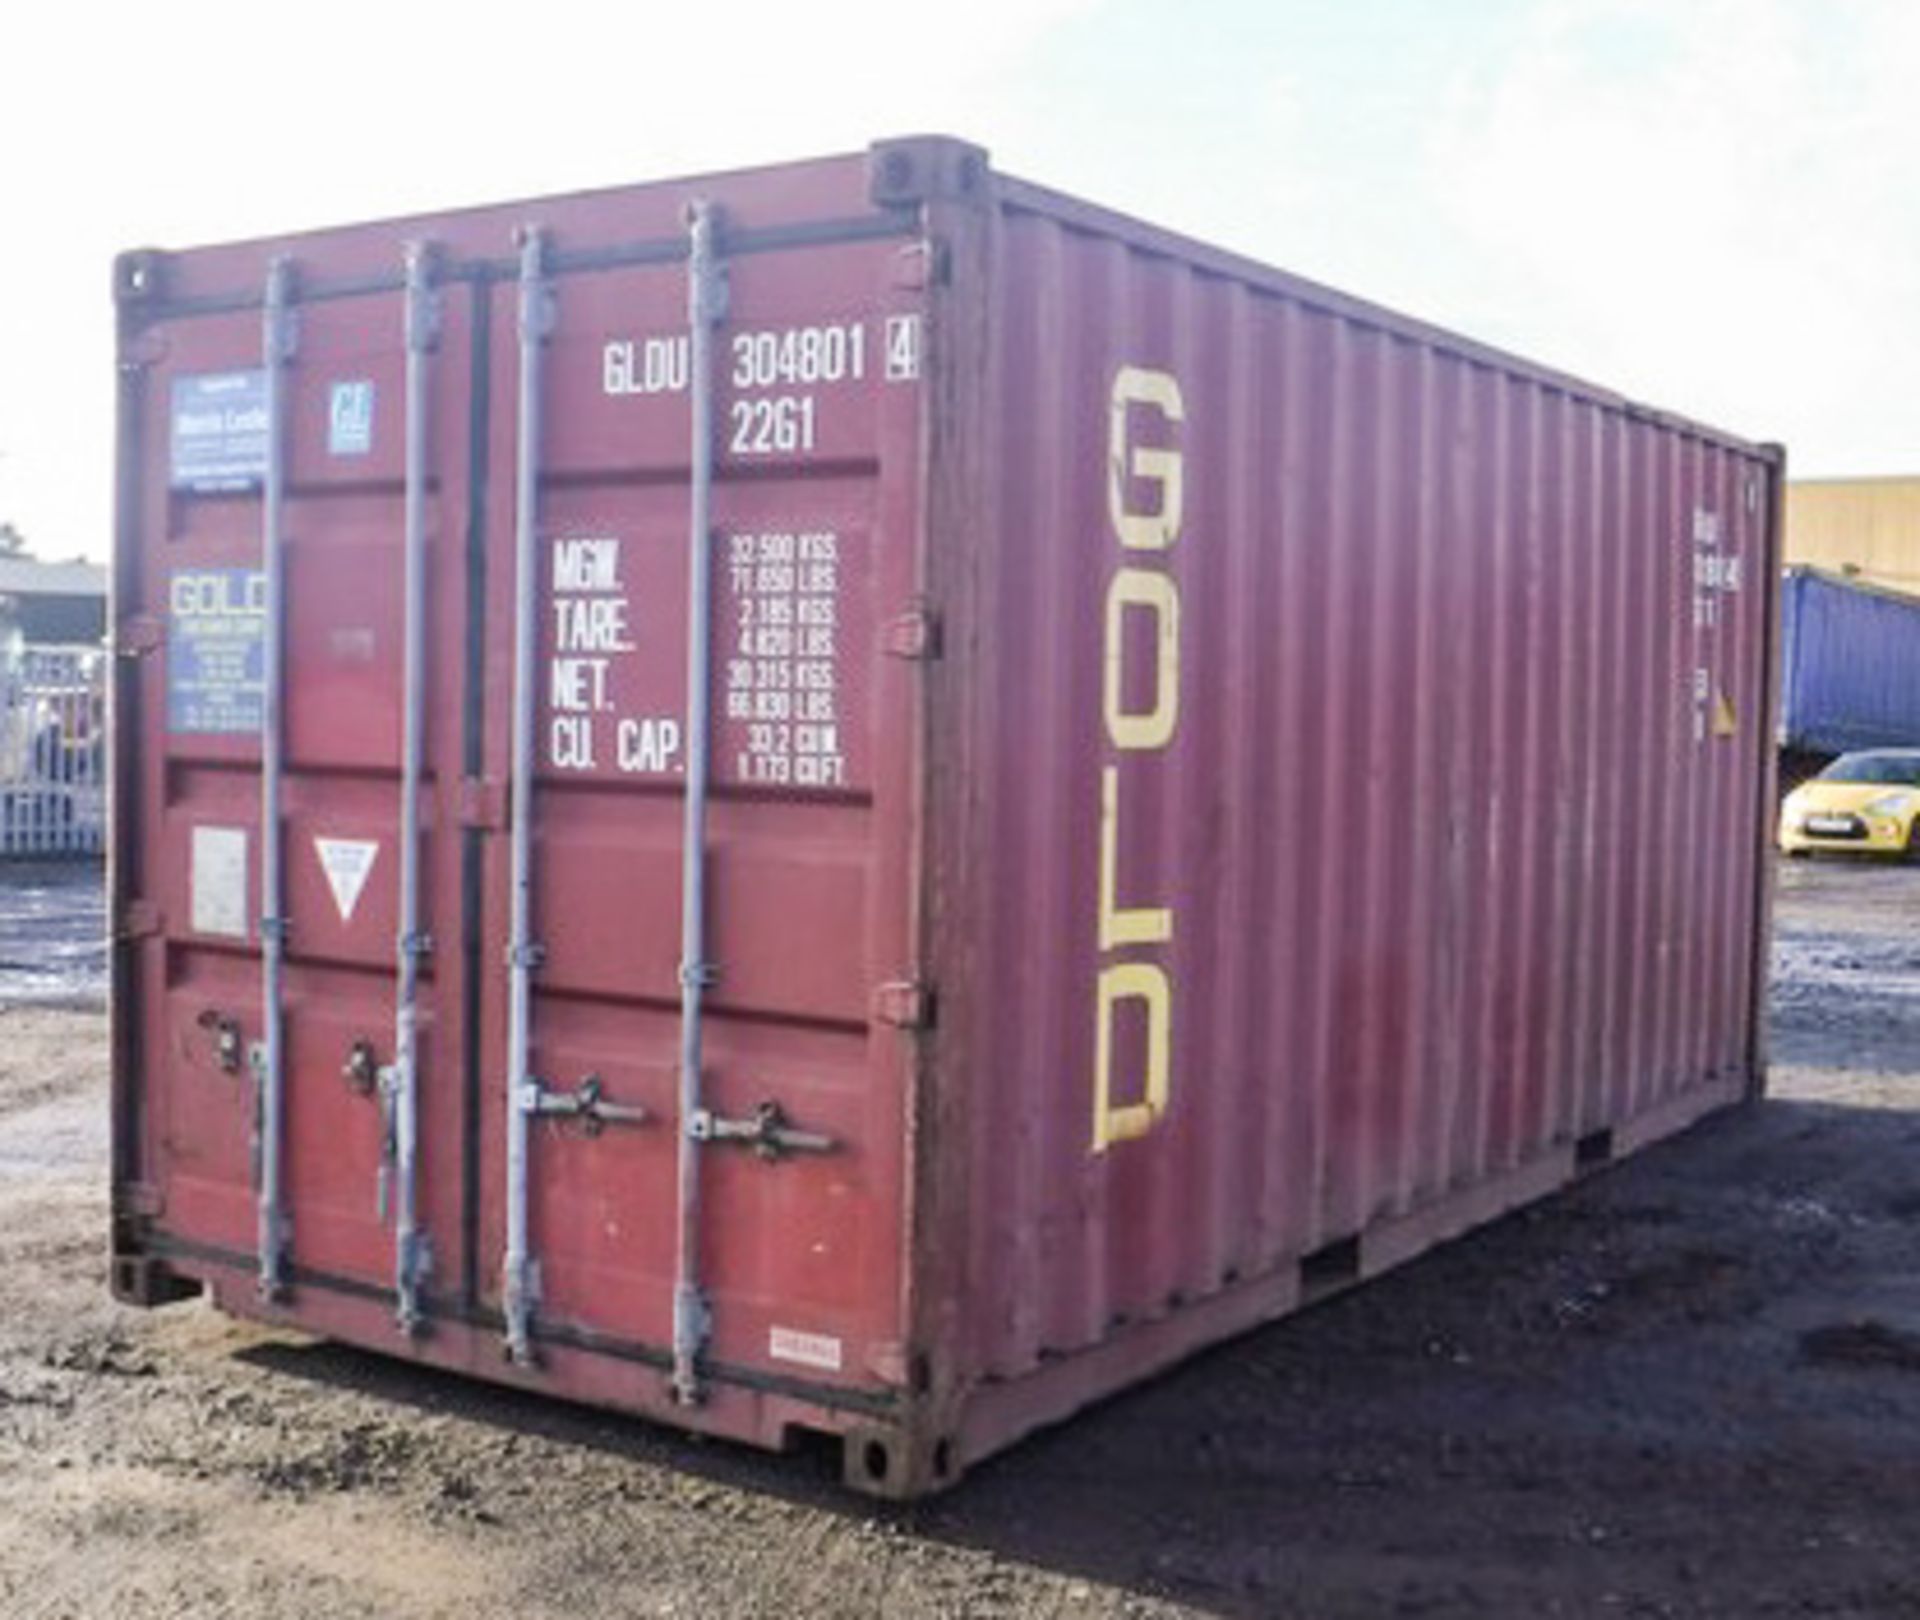 USED 20FT SHIPPING CONTAINER, YEAR MANU - 2003, S/N GLDU3048014 - Image 2 of 15